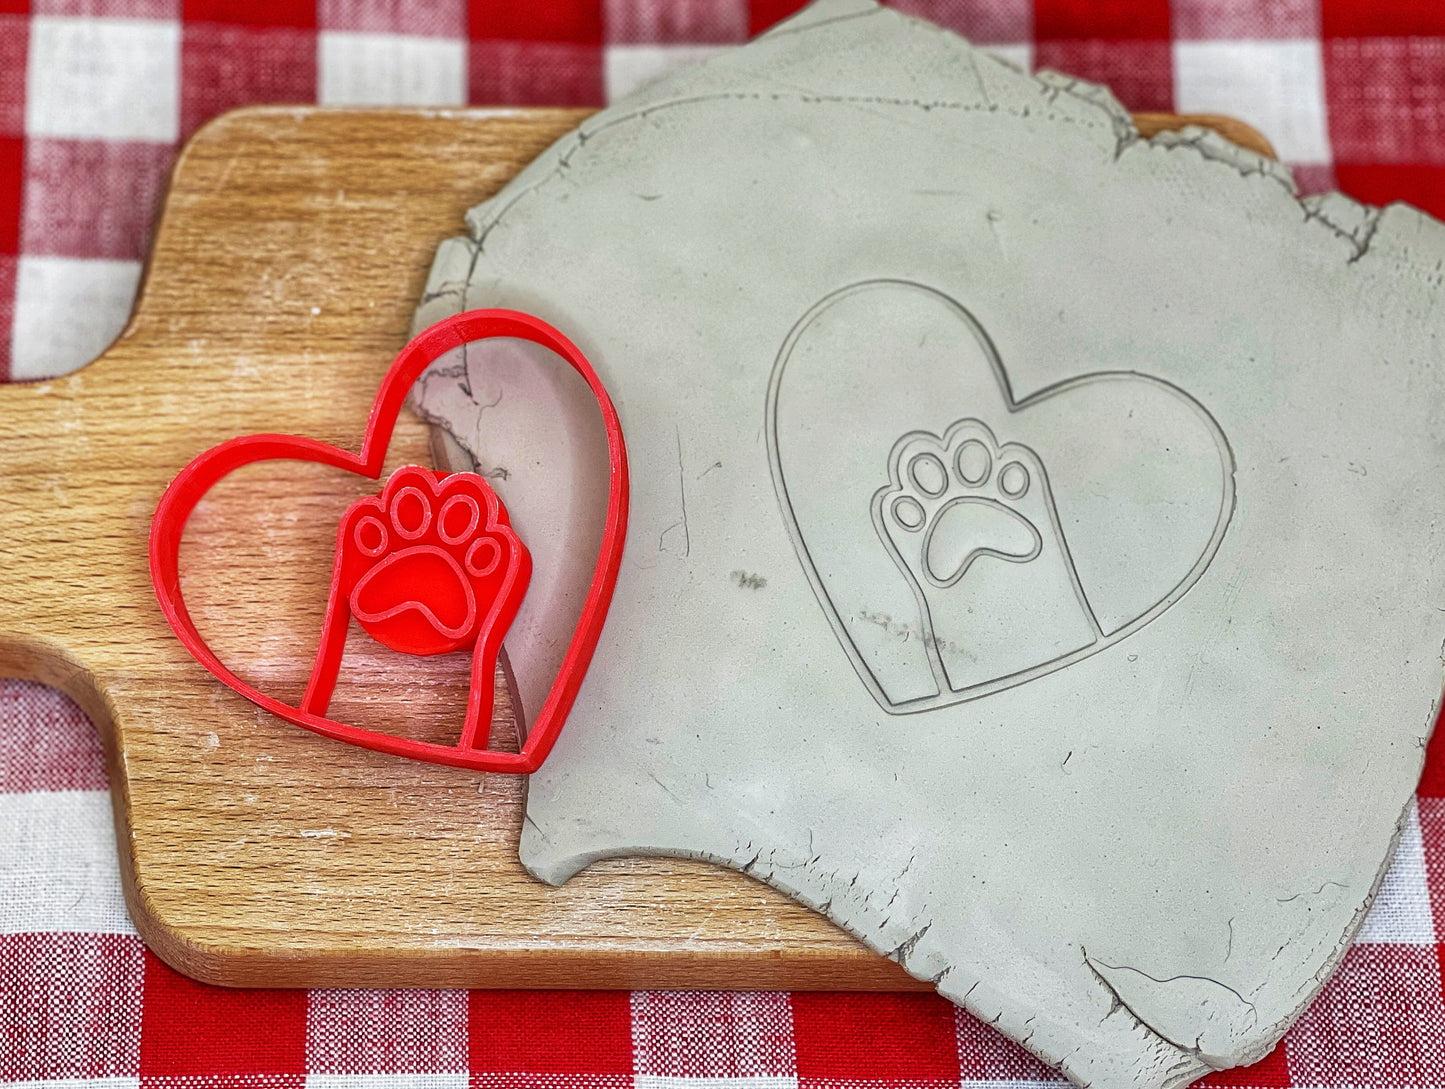 Cat / Dog Paw Reversible Heart Pottery Stamp - Pet Doodle series, pottery tool - multiple sizes